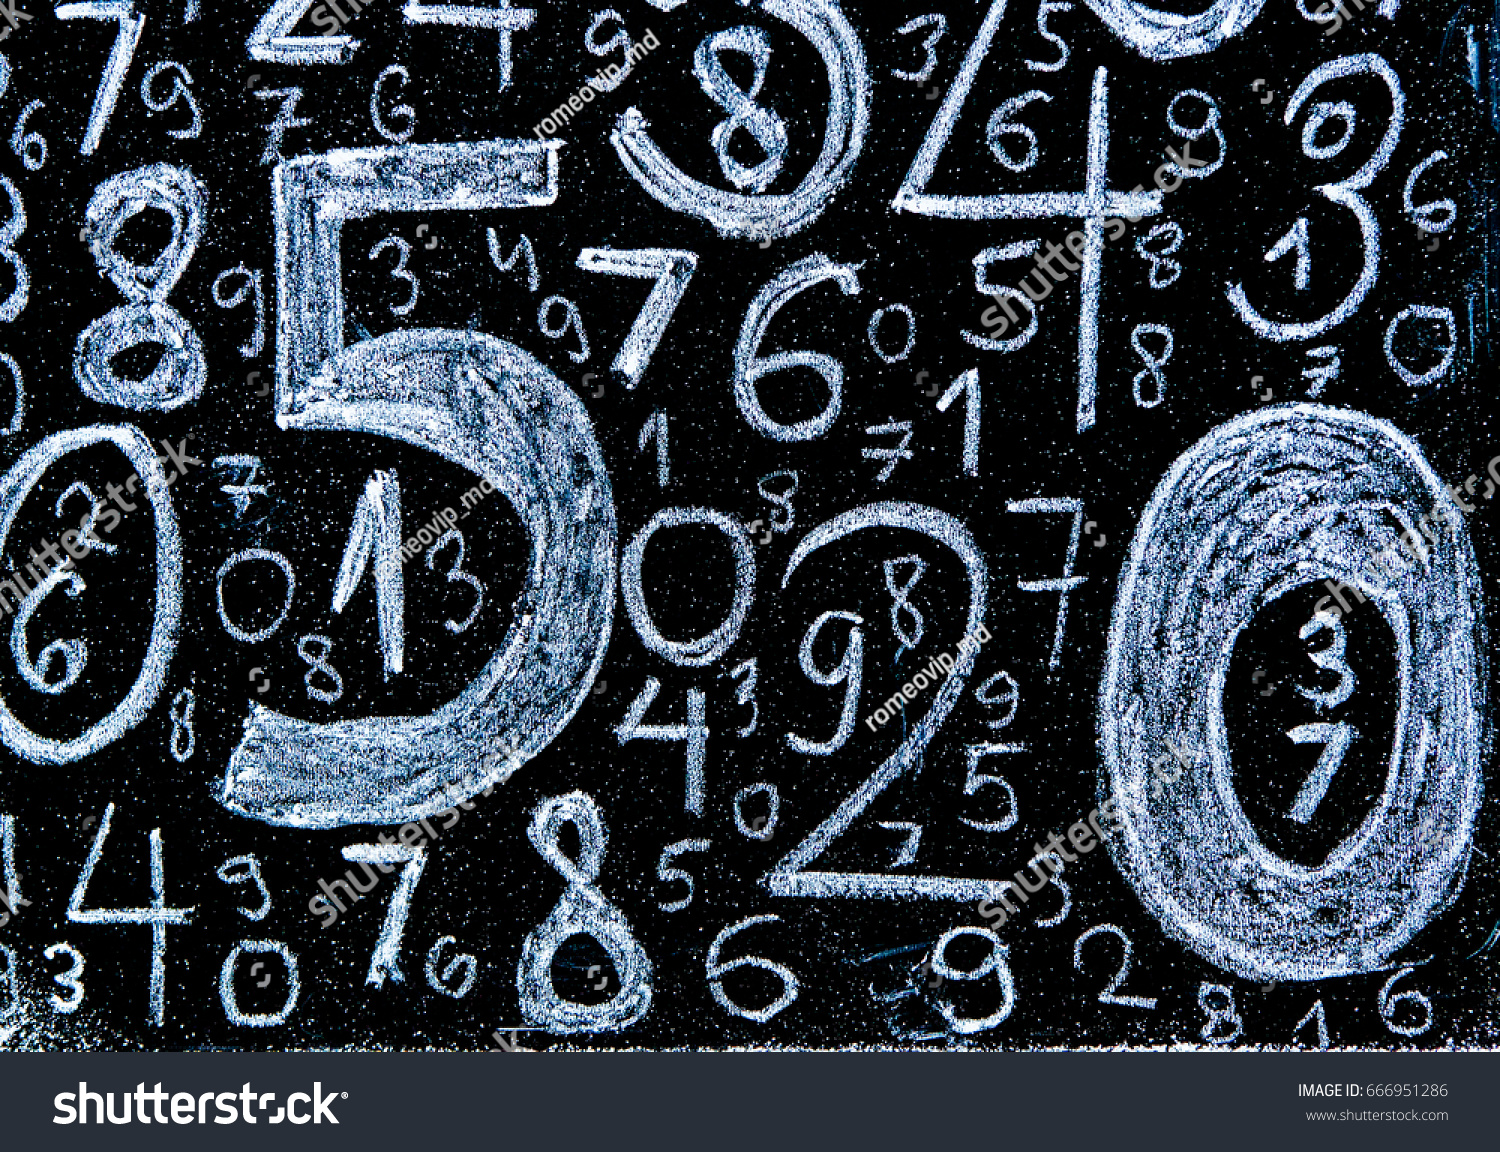 Background of numbers. from zero to nine. Background with numbers. Numbers texture. #666951286